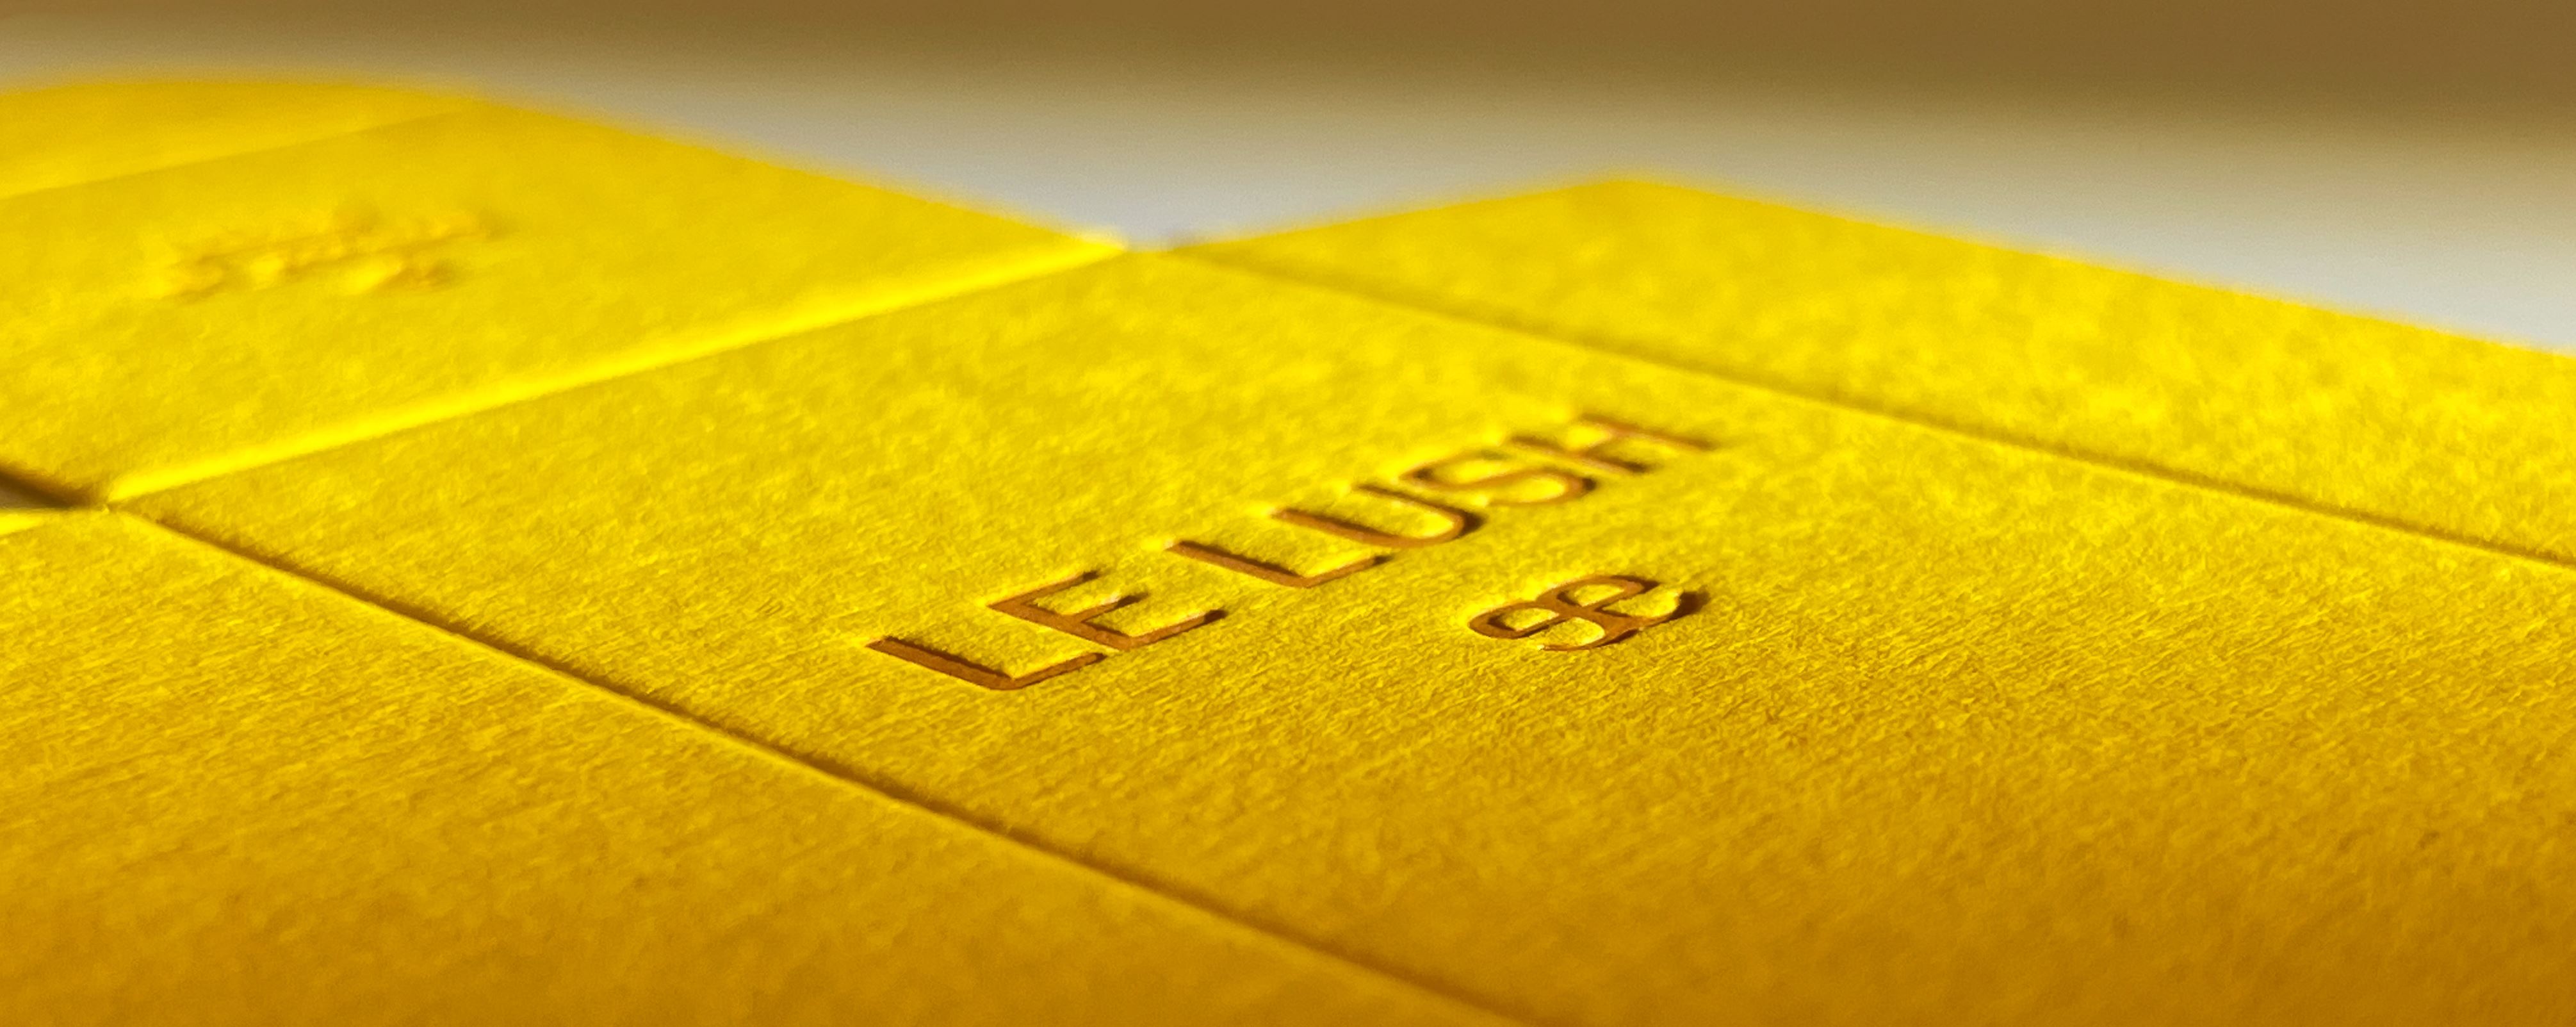 A close up of a yellow product package with a dark yellow letterpress design.